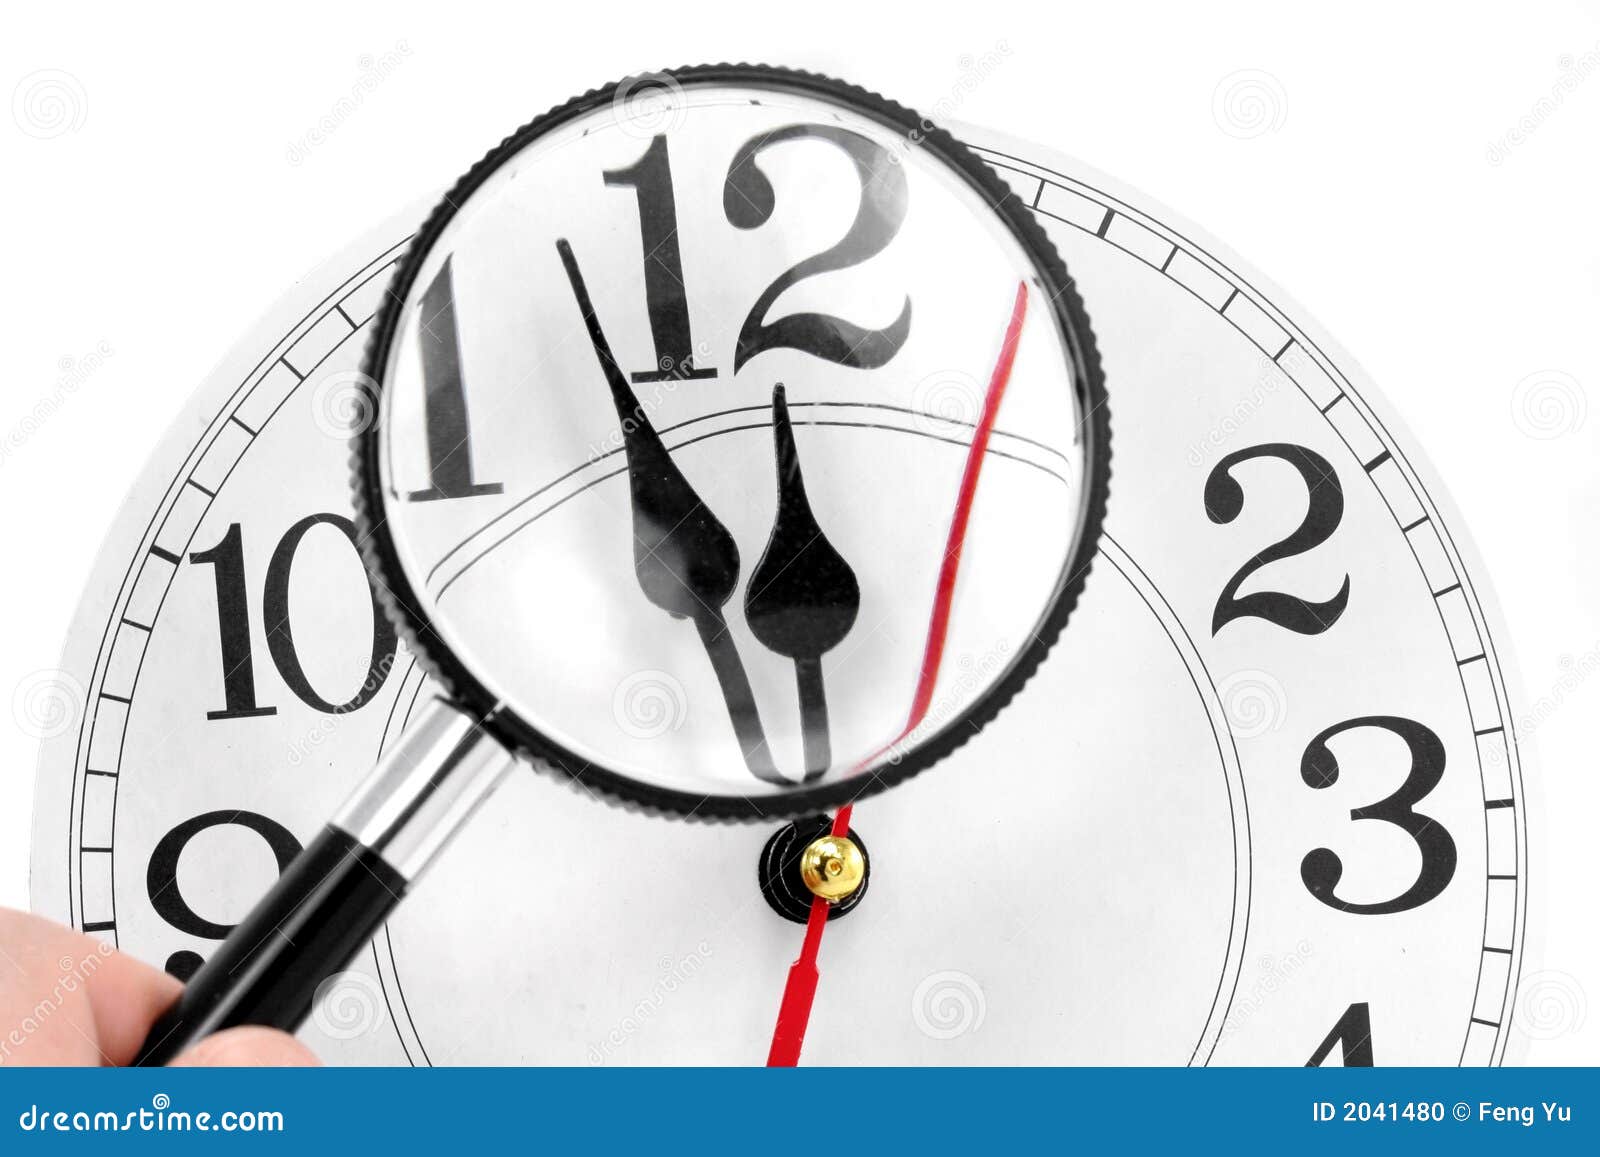 Time control Stock Photos, Royalty Free Time control Images